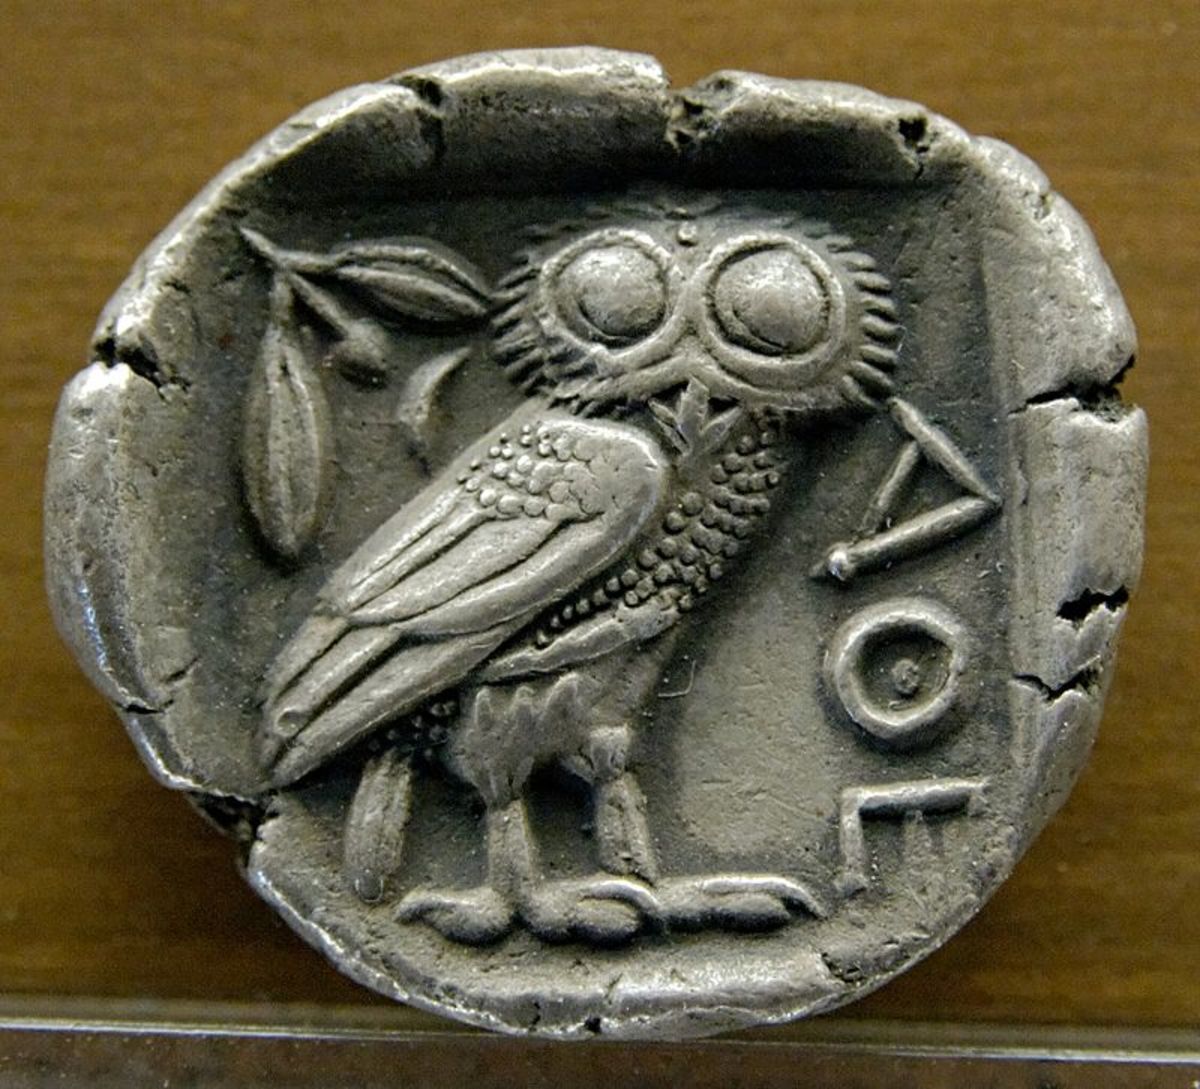 Owl iconography on an ancient artifact.